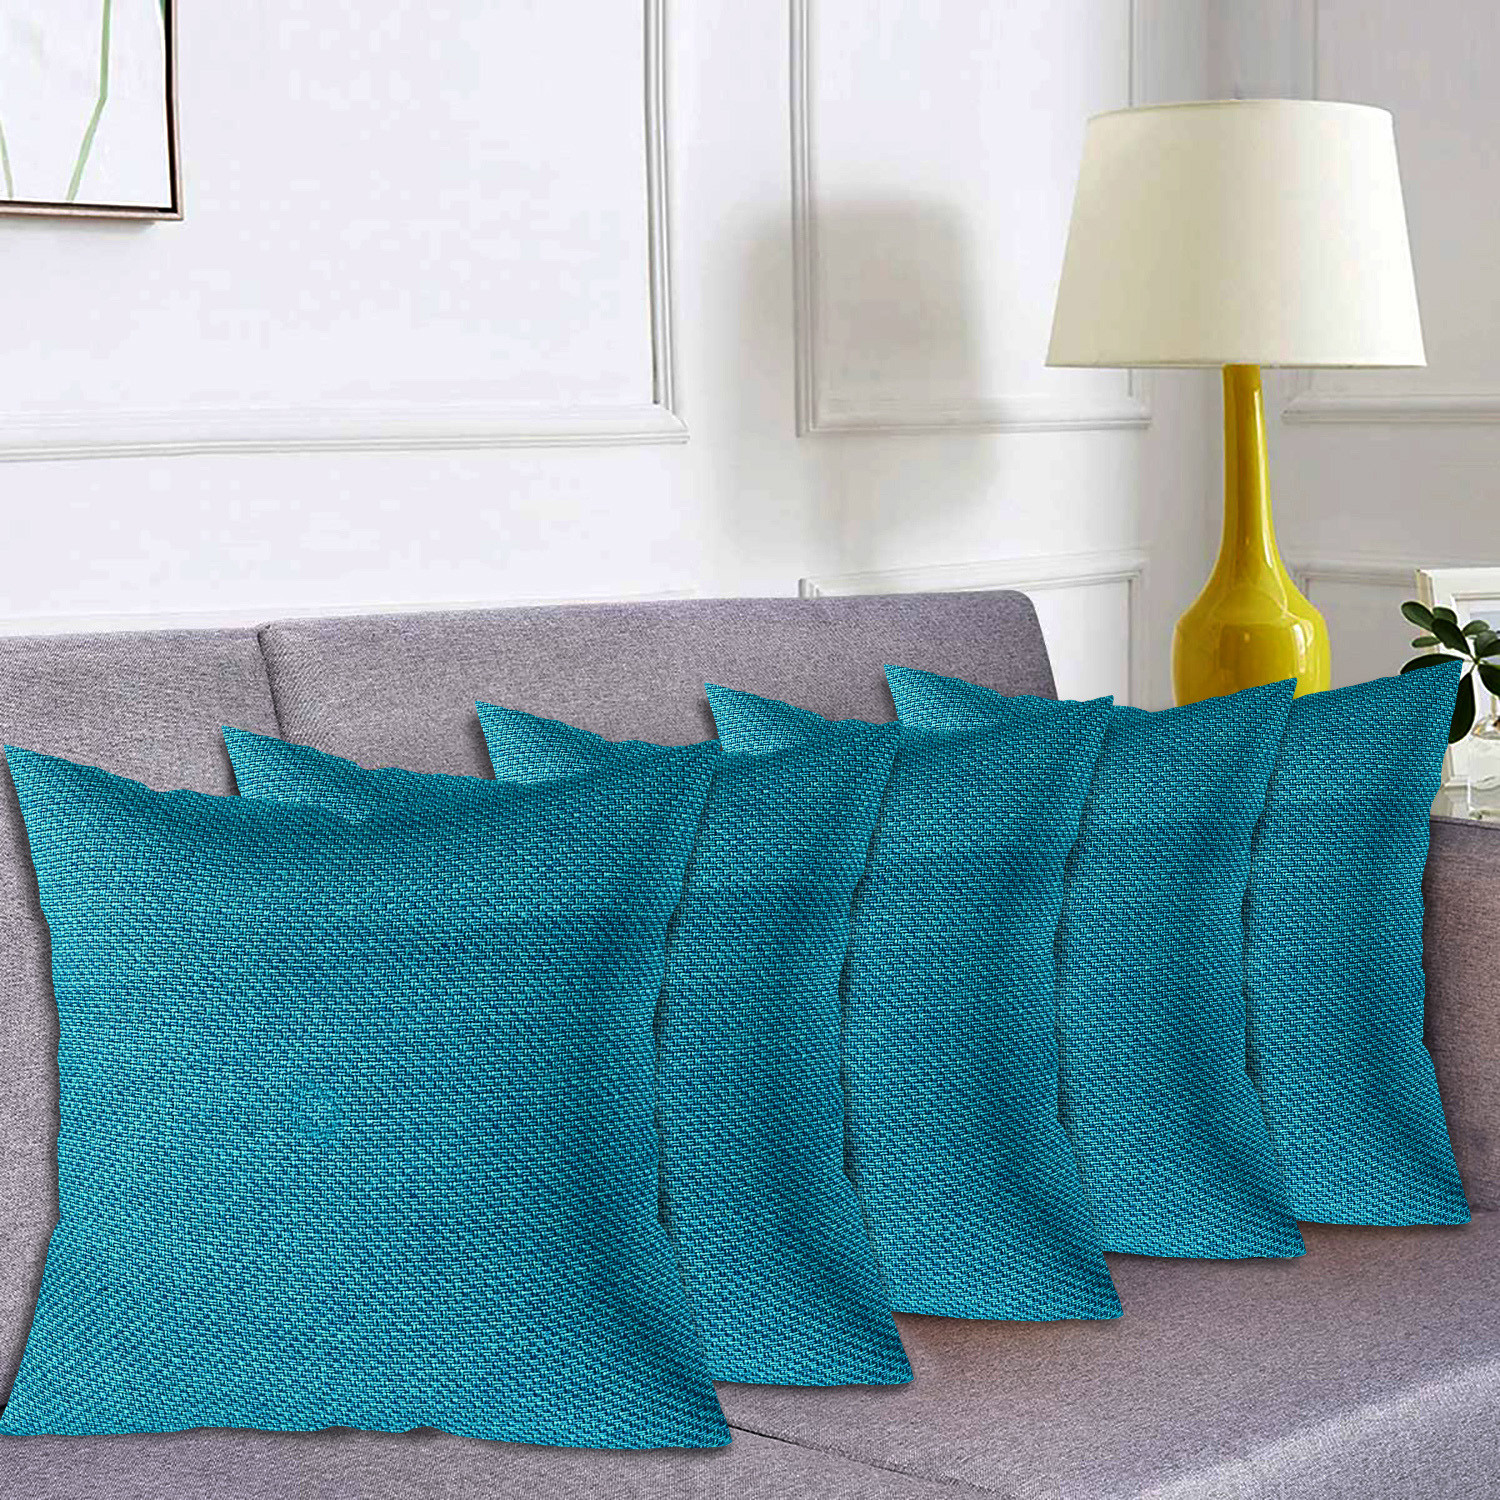 Kuber Industries Jute Cotton Decorative Square Cushion Cover, Cushion Case For Sofa Couch Bed 16x16 Inch-(Blue)